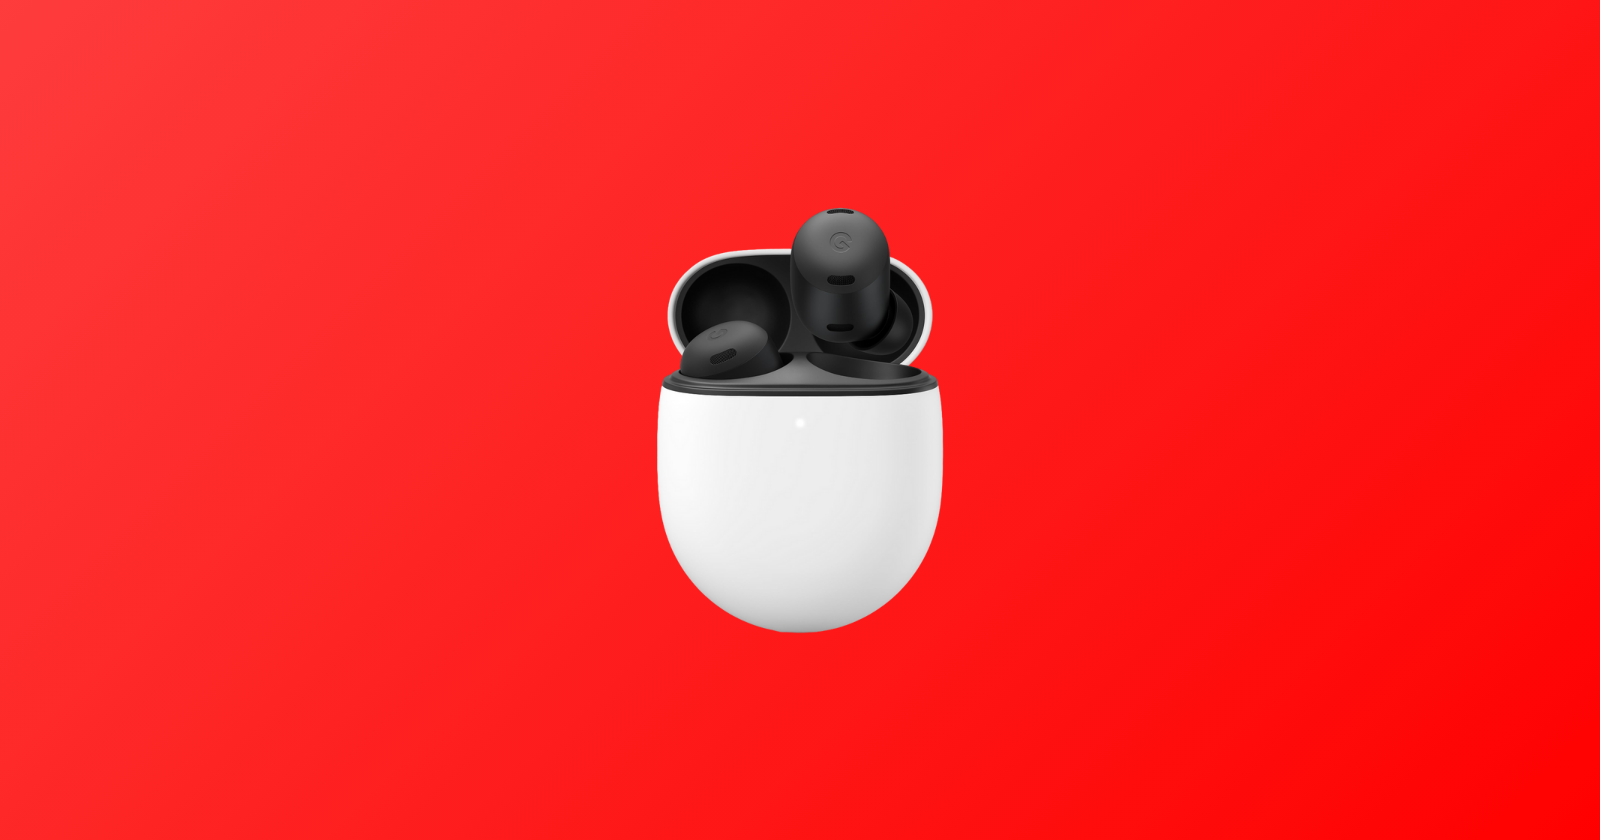 Google Pixel Buds Pro's price drops to CAD 199 ($147) in Canada